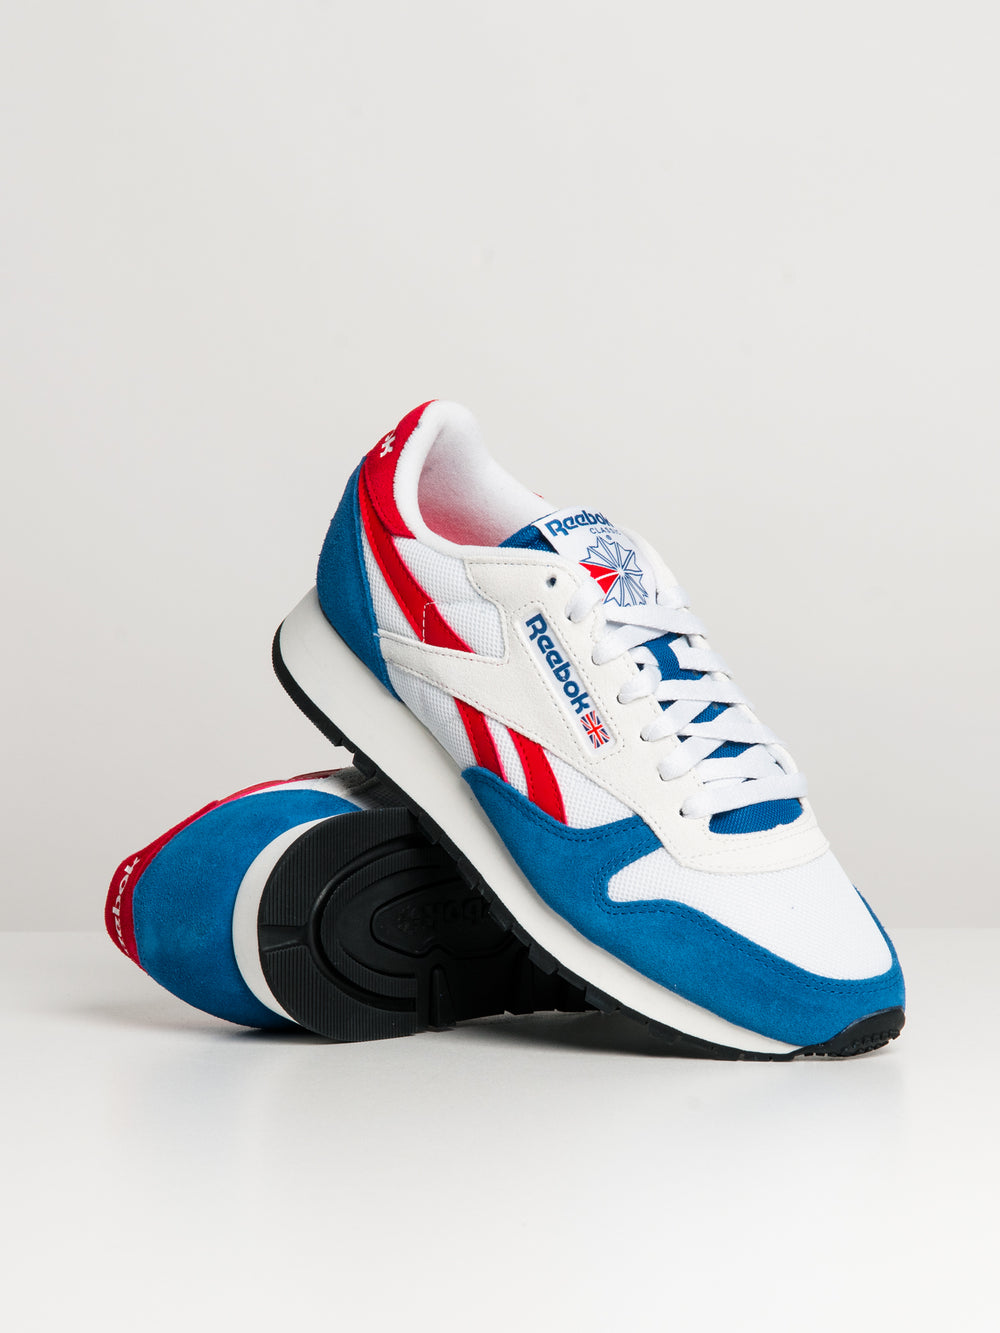 MENS REEBOK CLASSIC LEATHER SNEAKER - CLEARANCE